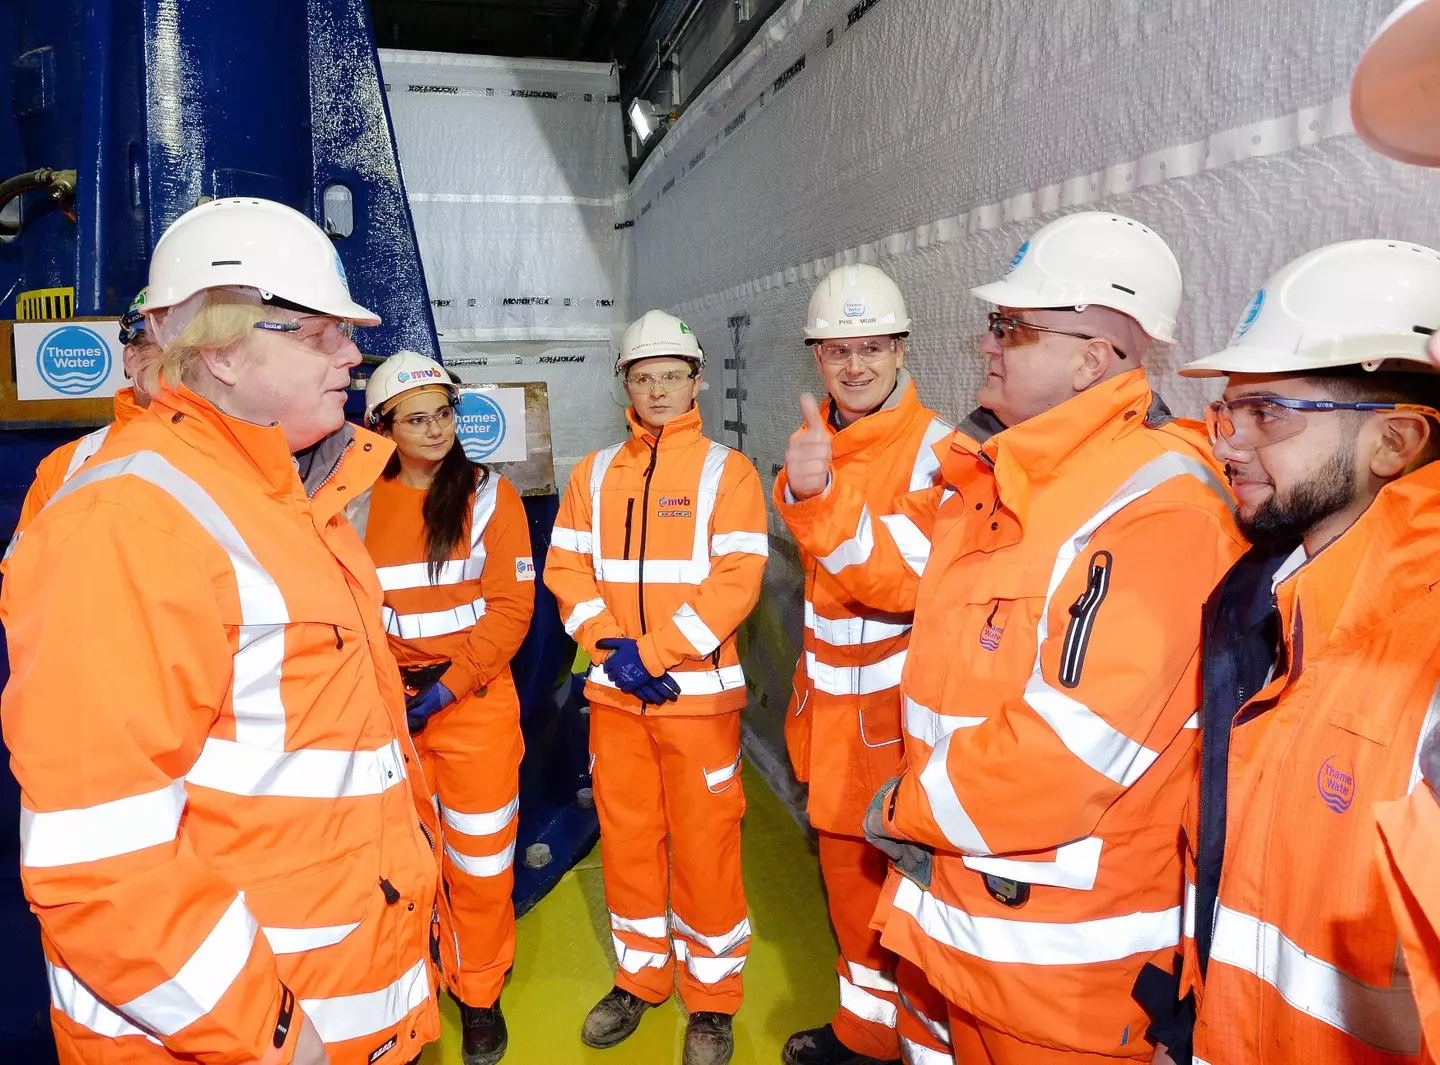 Boris Johnson at the opening of the Lee Tunnel in 2016.